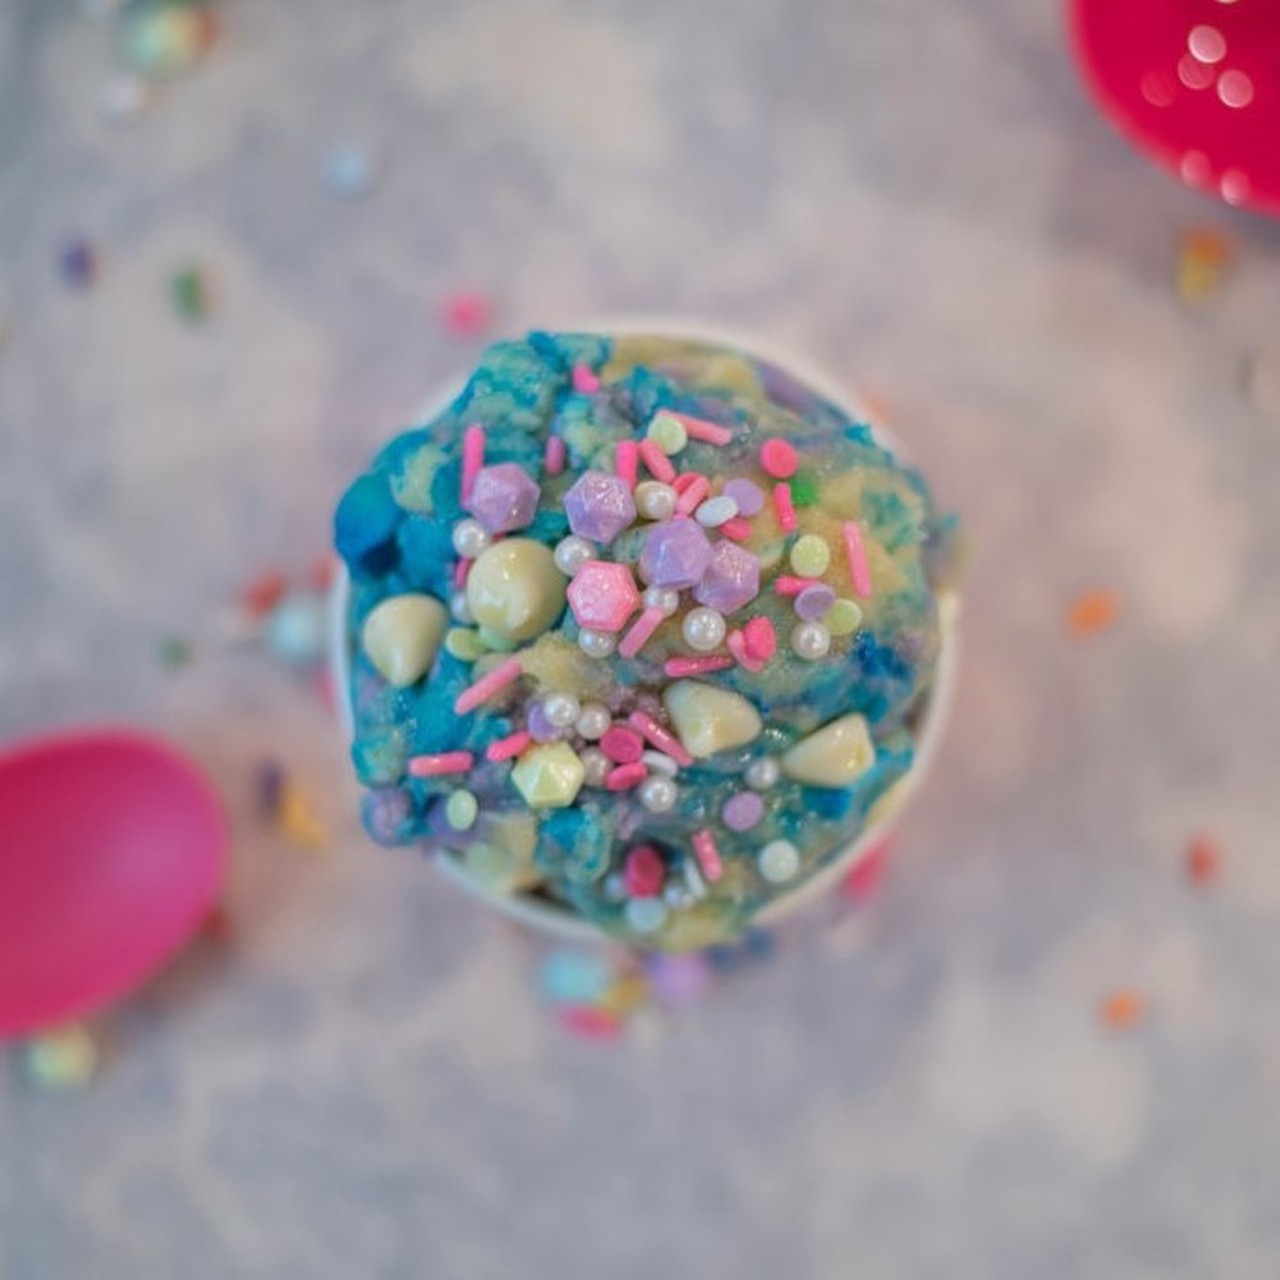 Gourmet Cookie Dough
The Happy Dough's adventurous take on edible cookie dough: "sparkly sugar cookie." How perfect is this food trend for the occasion?